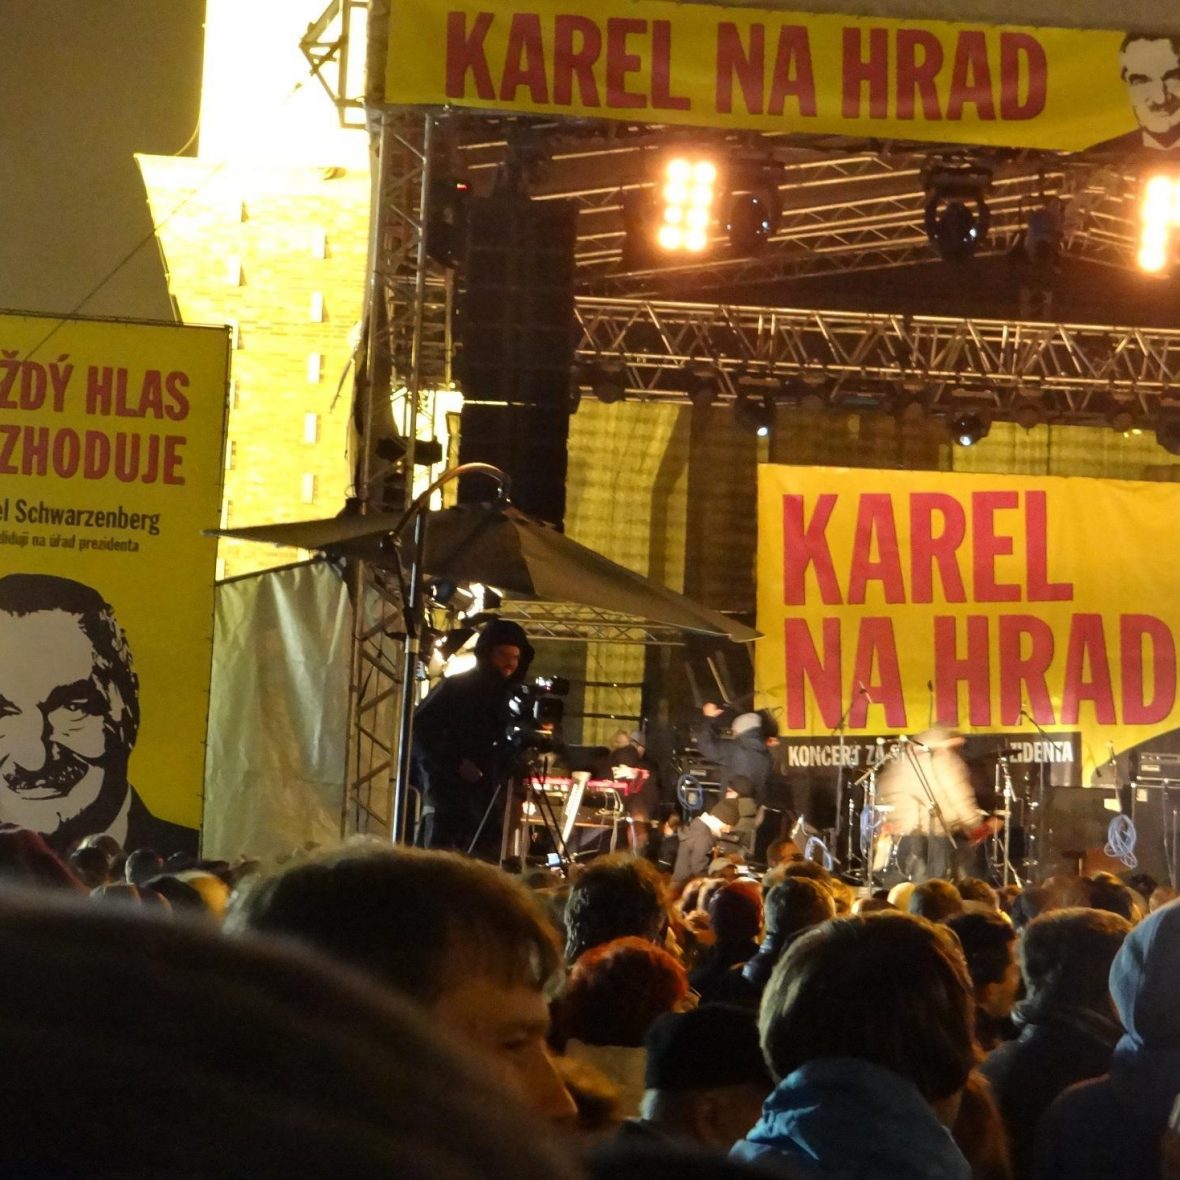 outdoor concert for a Czech political campaign, man on stage with a microphone in hand and mixtables beside him, posters around in yellow